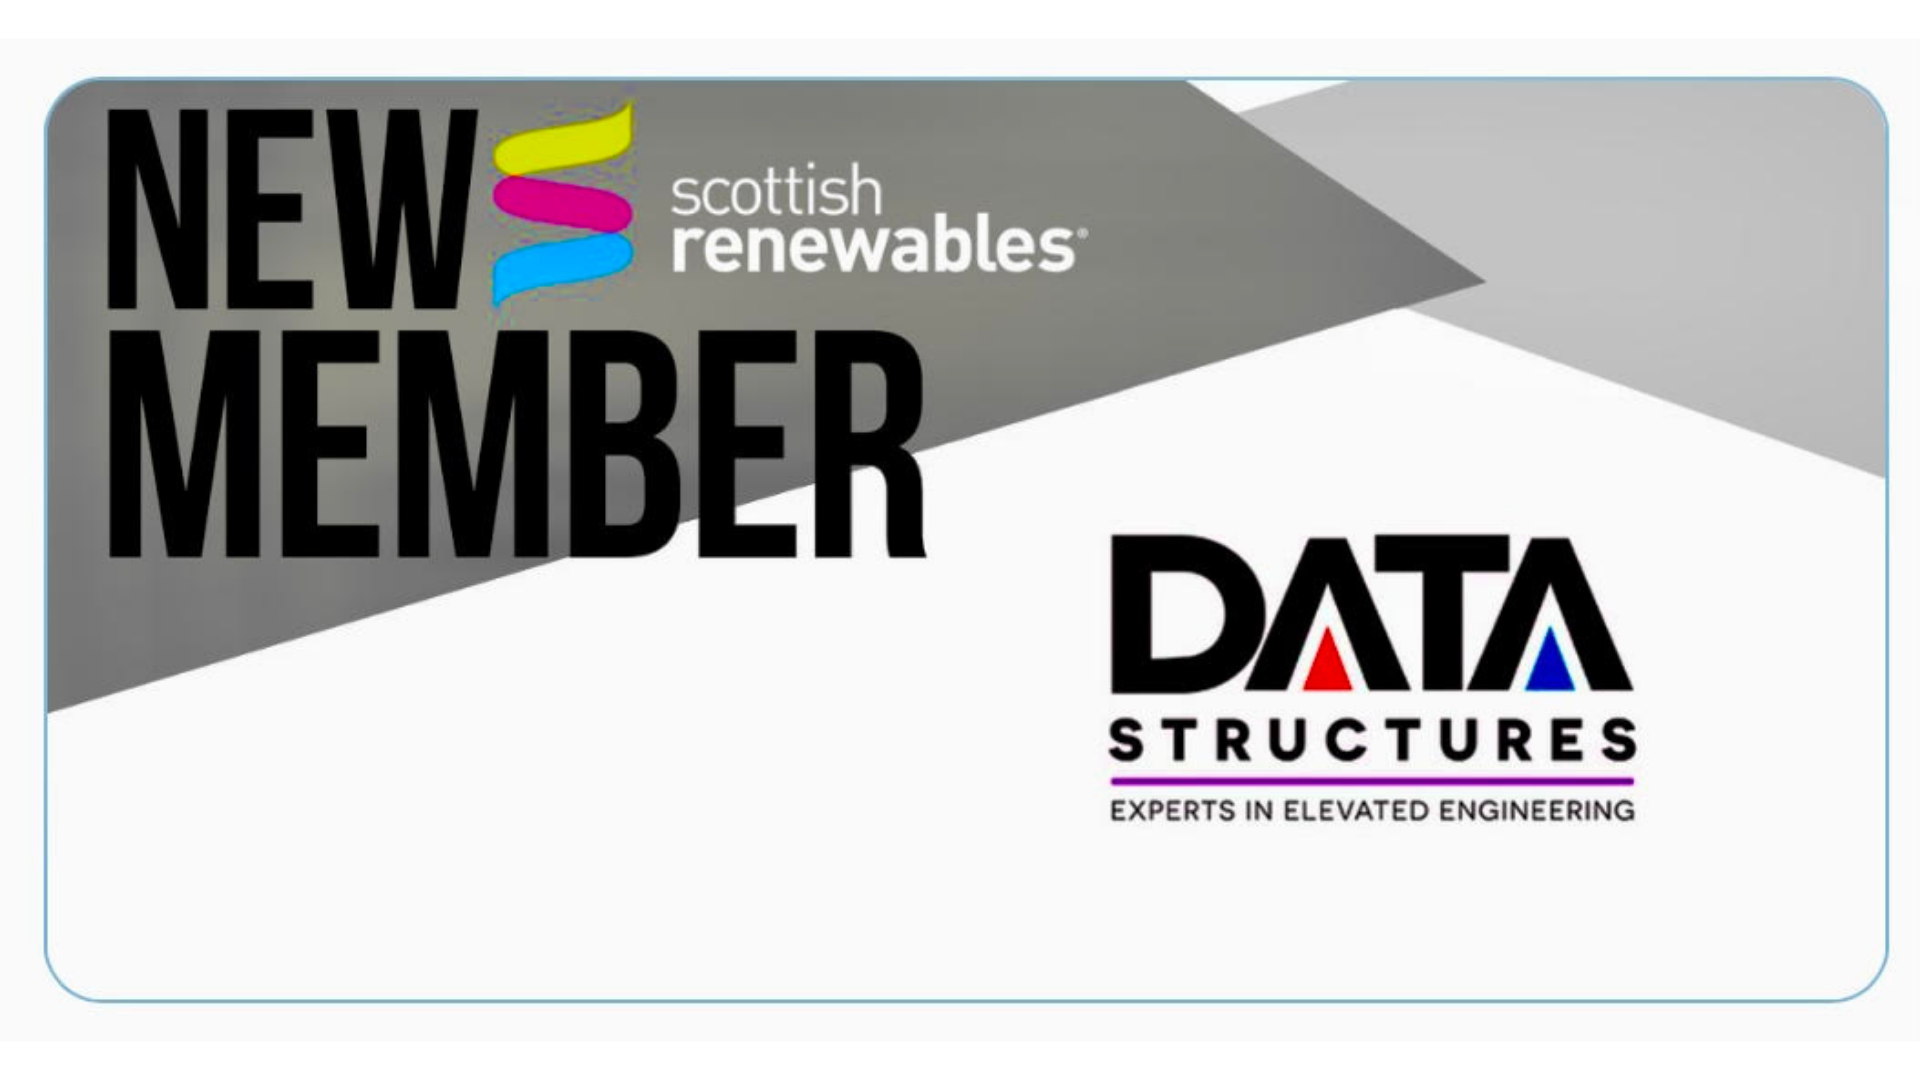 Data Structures UK (DSUK) are now members of Scottish Renewables